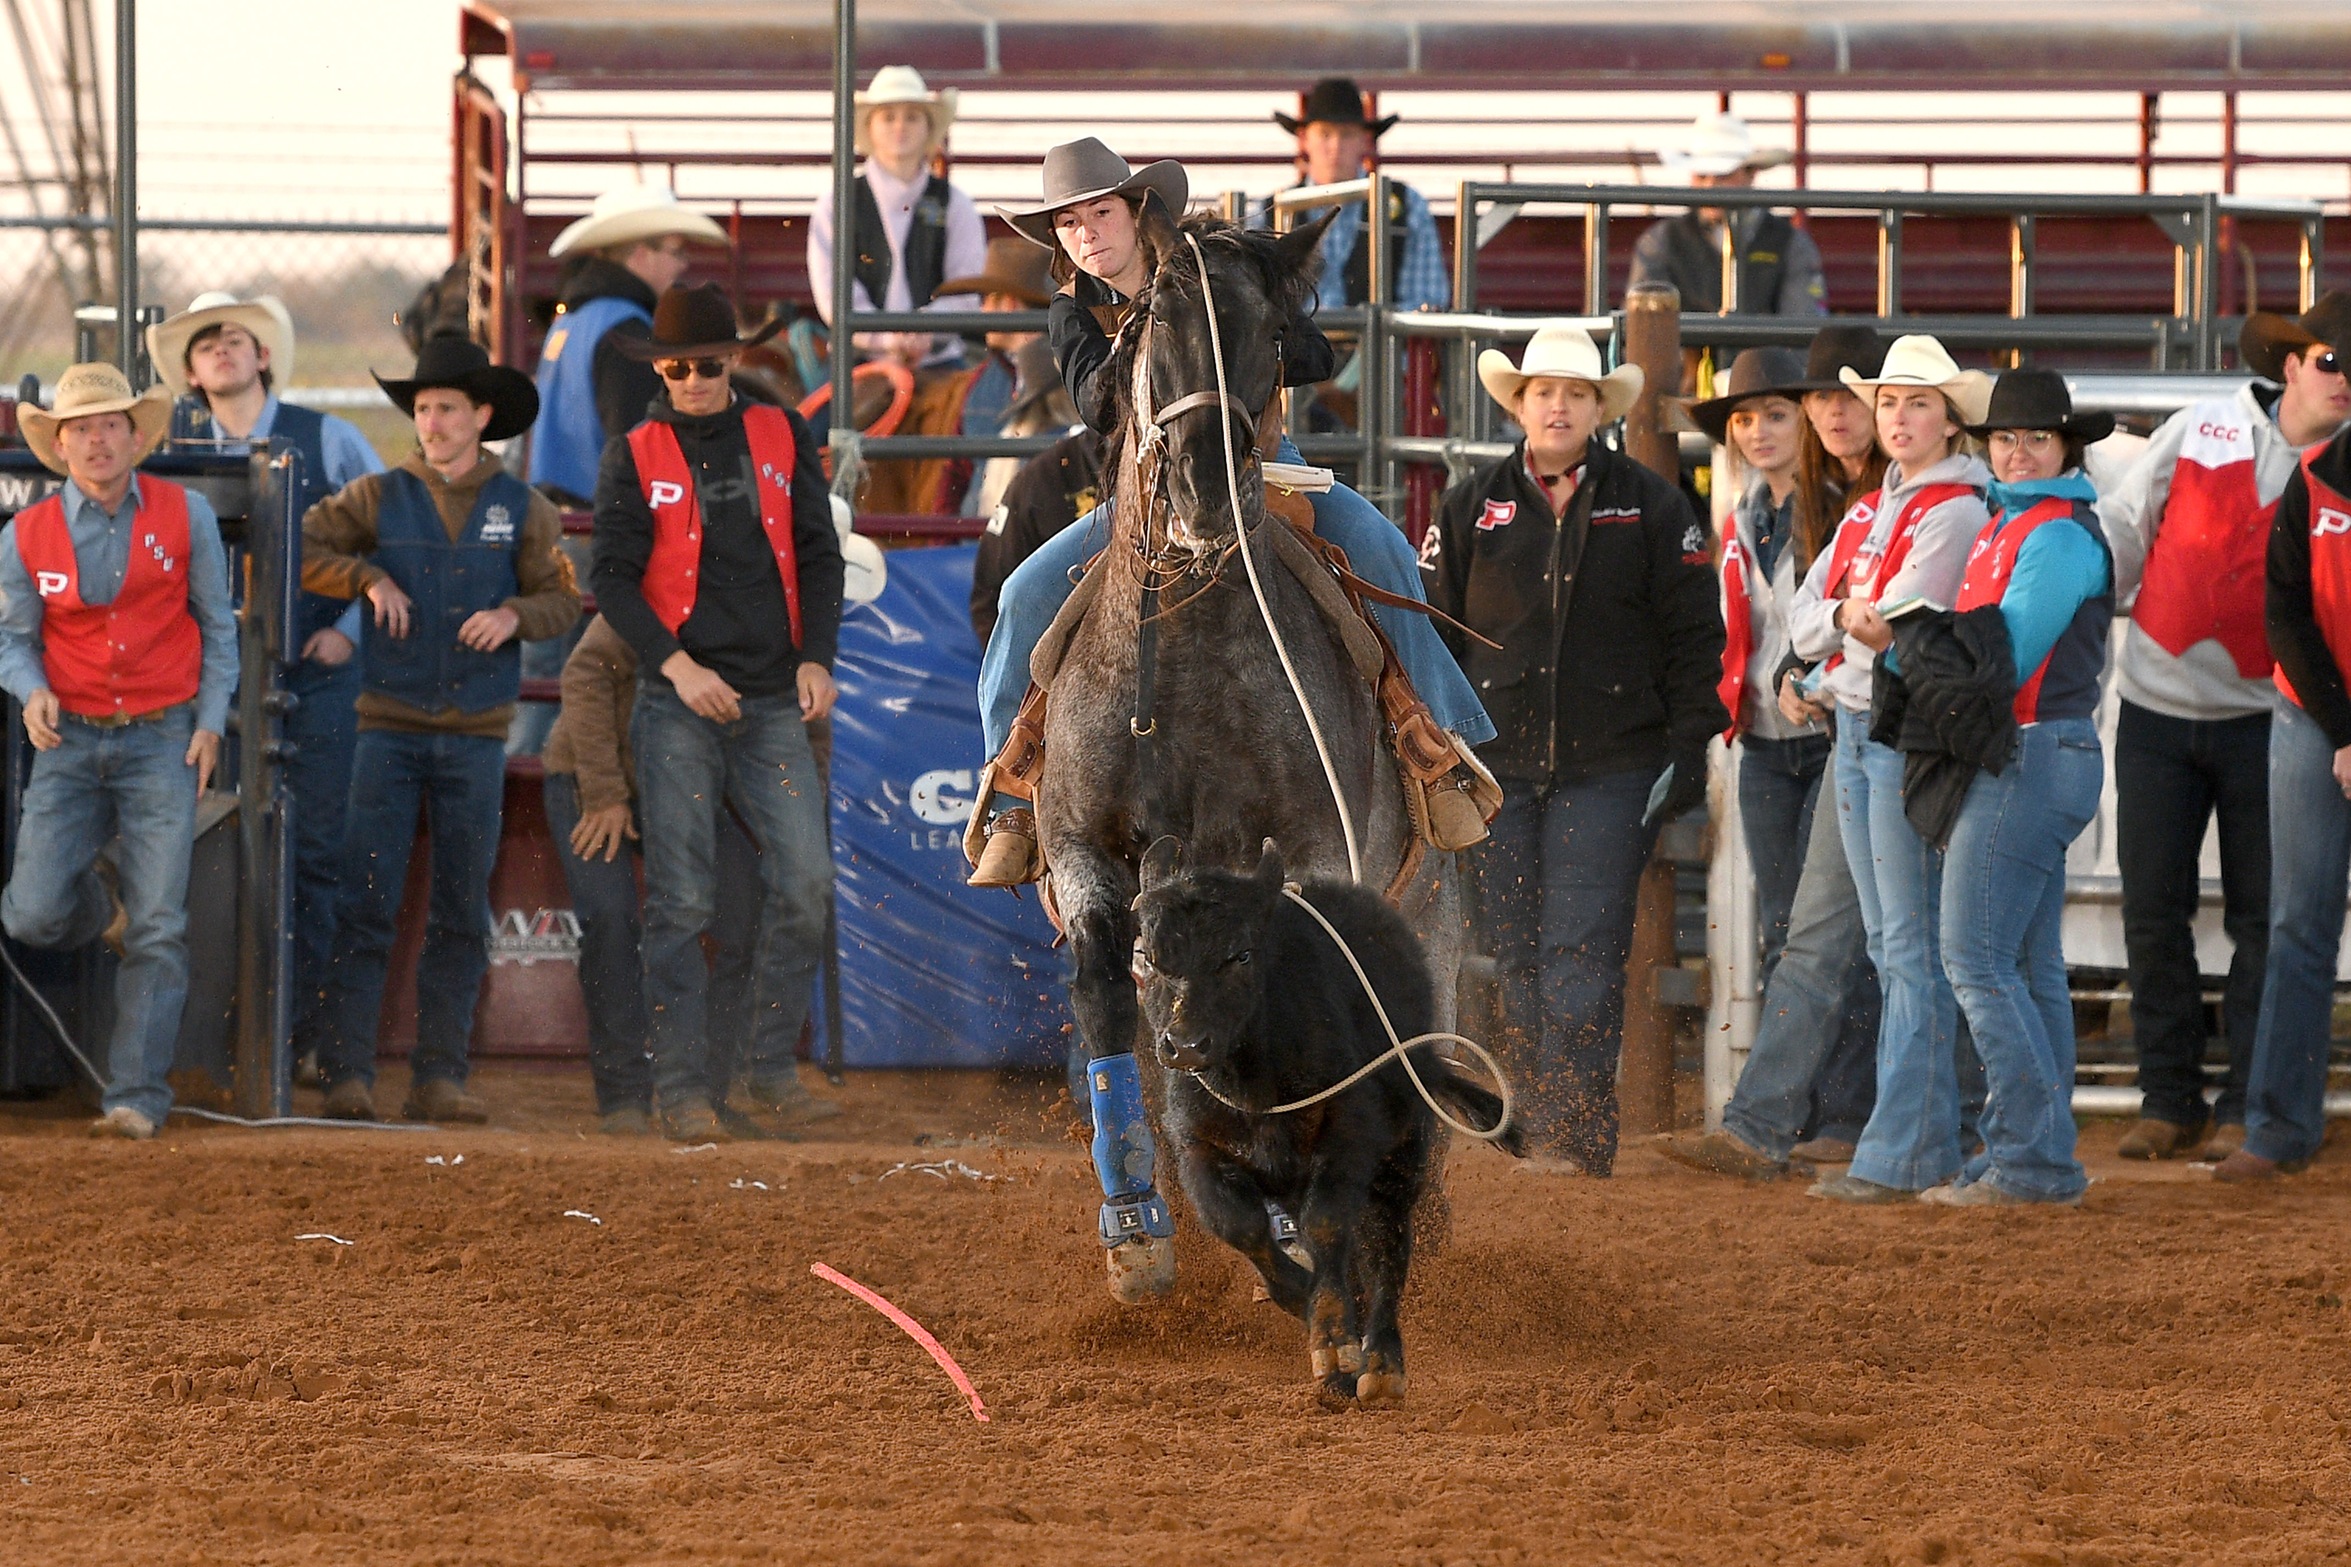 Broncbuster women claim SWOSU Rodeo Title